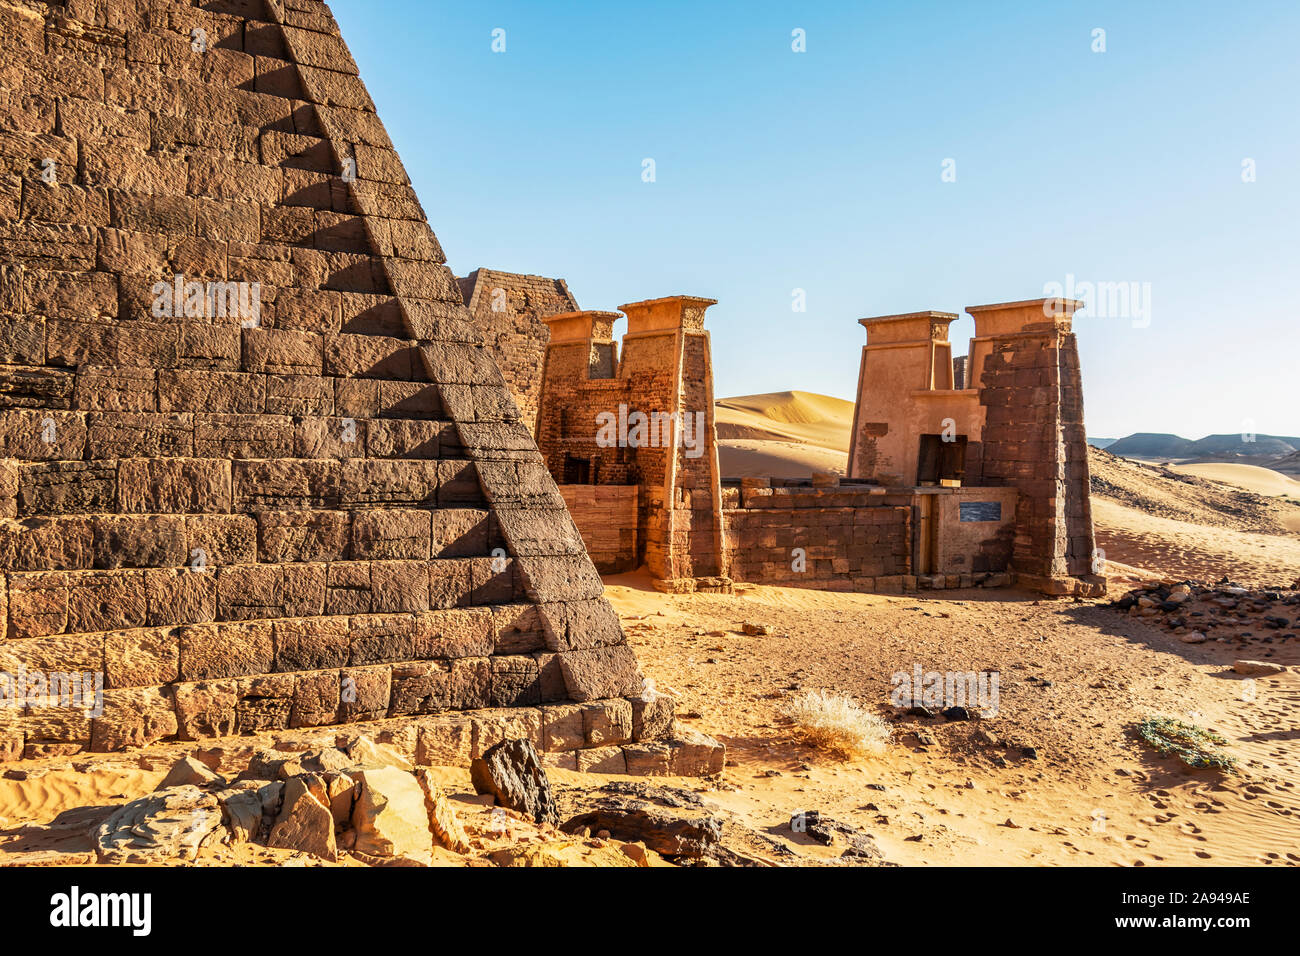 Pyramids in the Northern Cemetery at Begarawiyah, containing 41 royal pyramids of the monarchs who ruled the Kingdom of Kush between 250 BCE and 32... Stock Photo